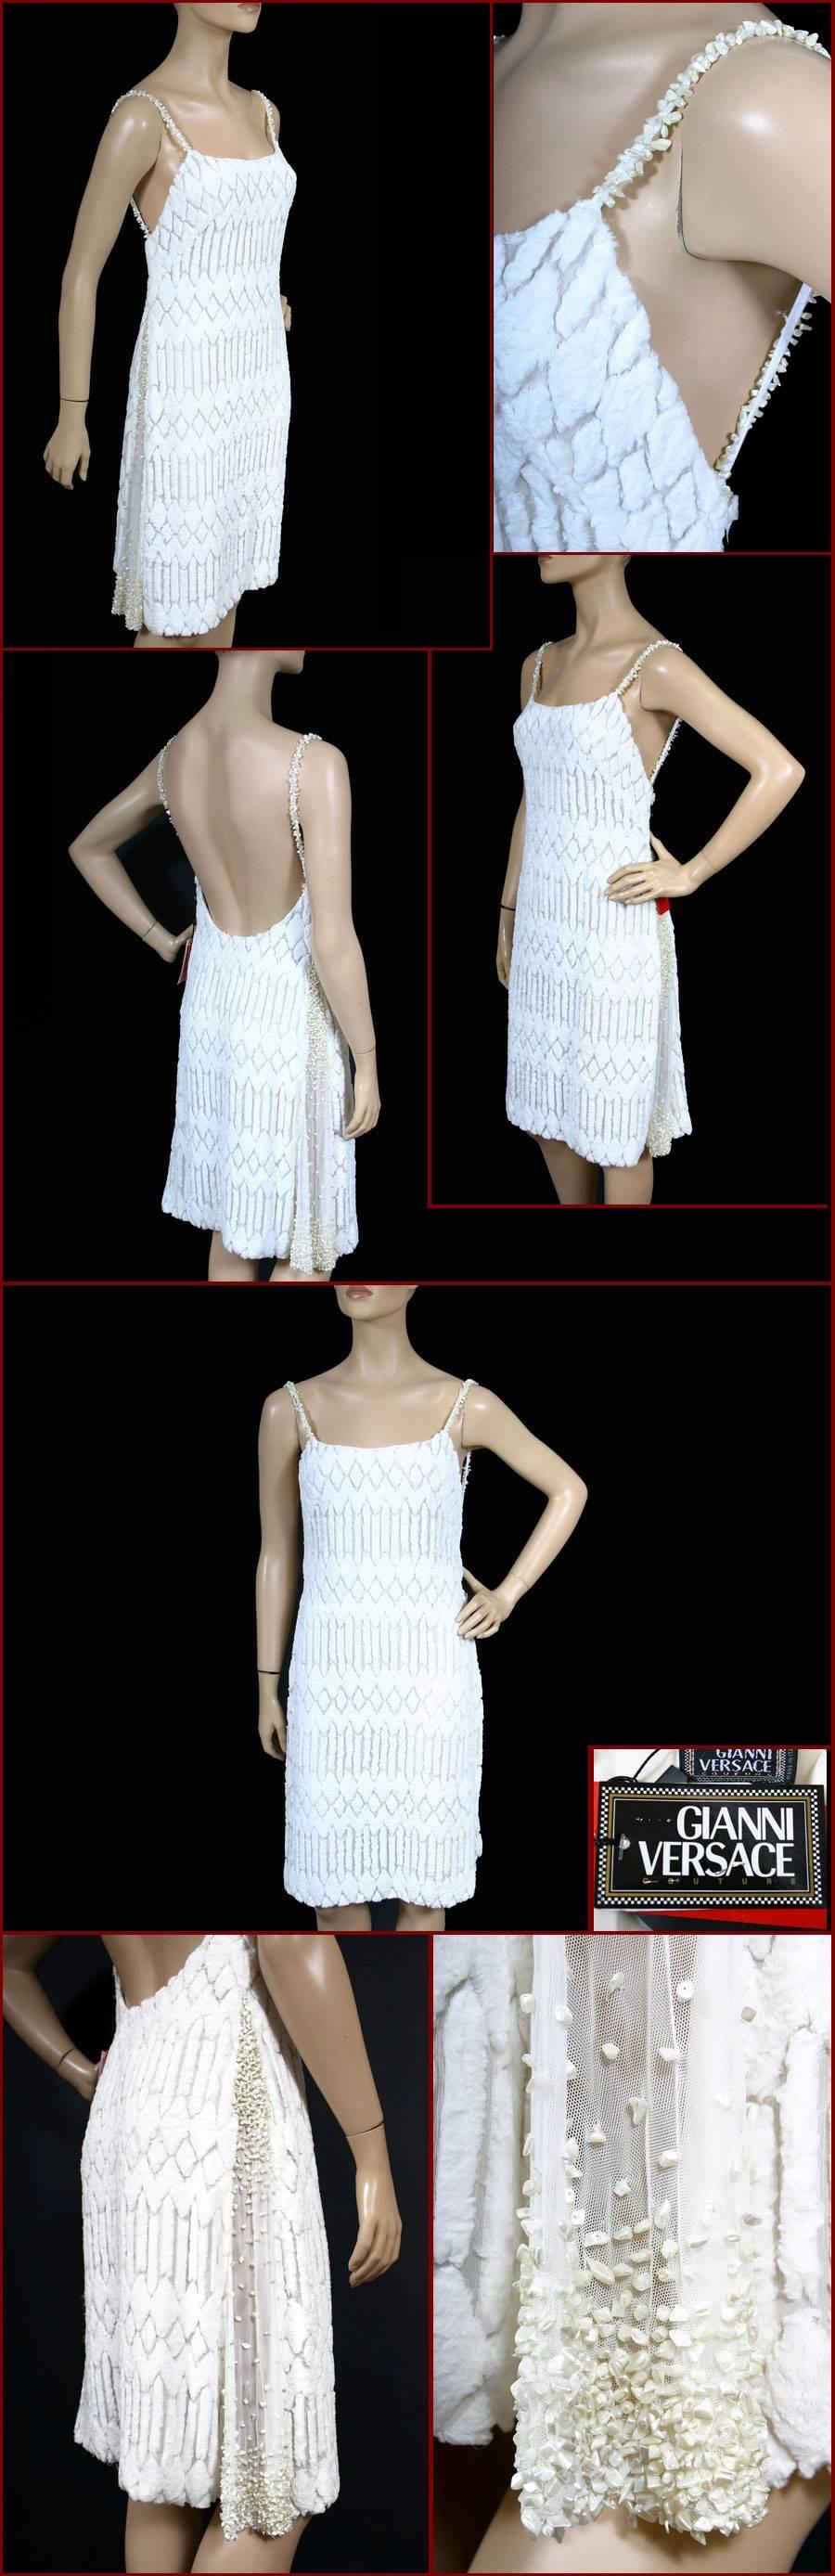 Gianni Versace Couture Pearl Embellished White Devore Dress

Highly Collectible!

Brand new, with tags!

Size 44 - US 8